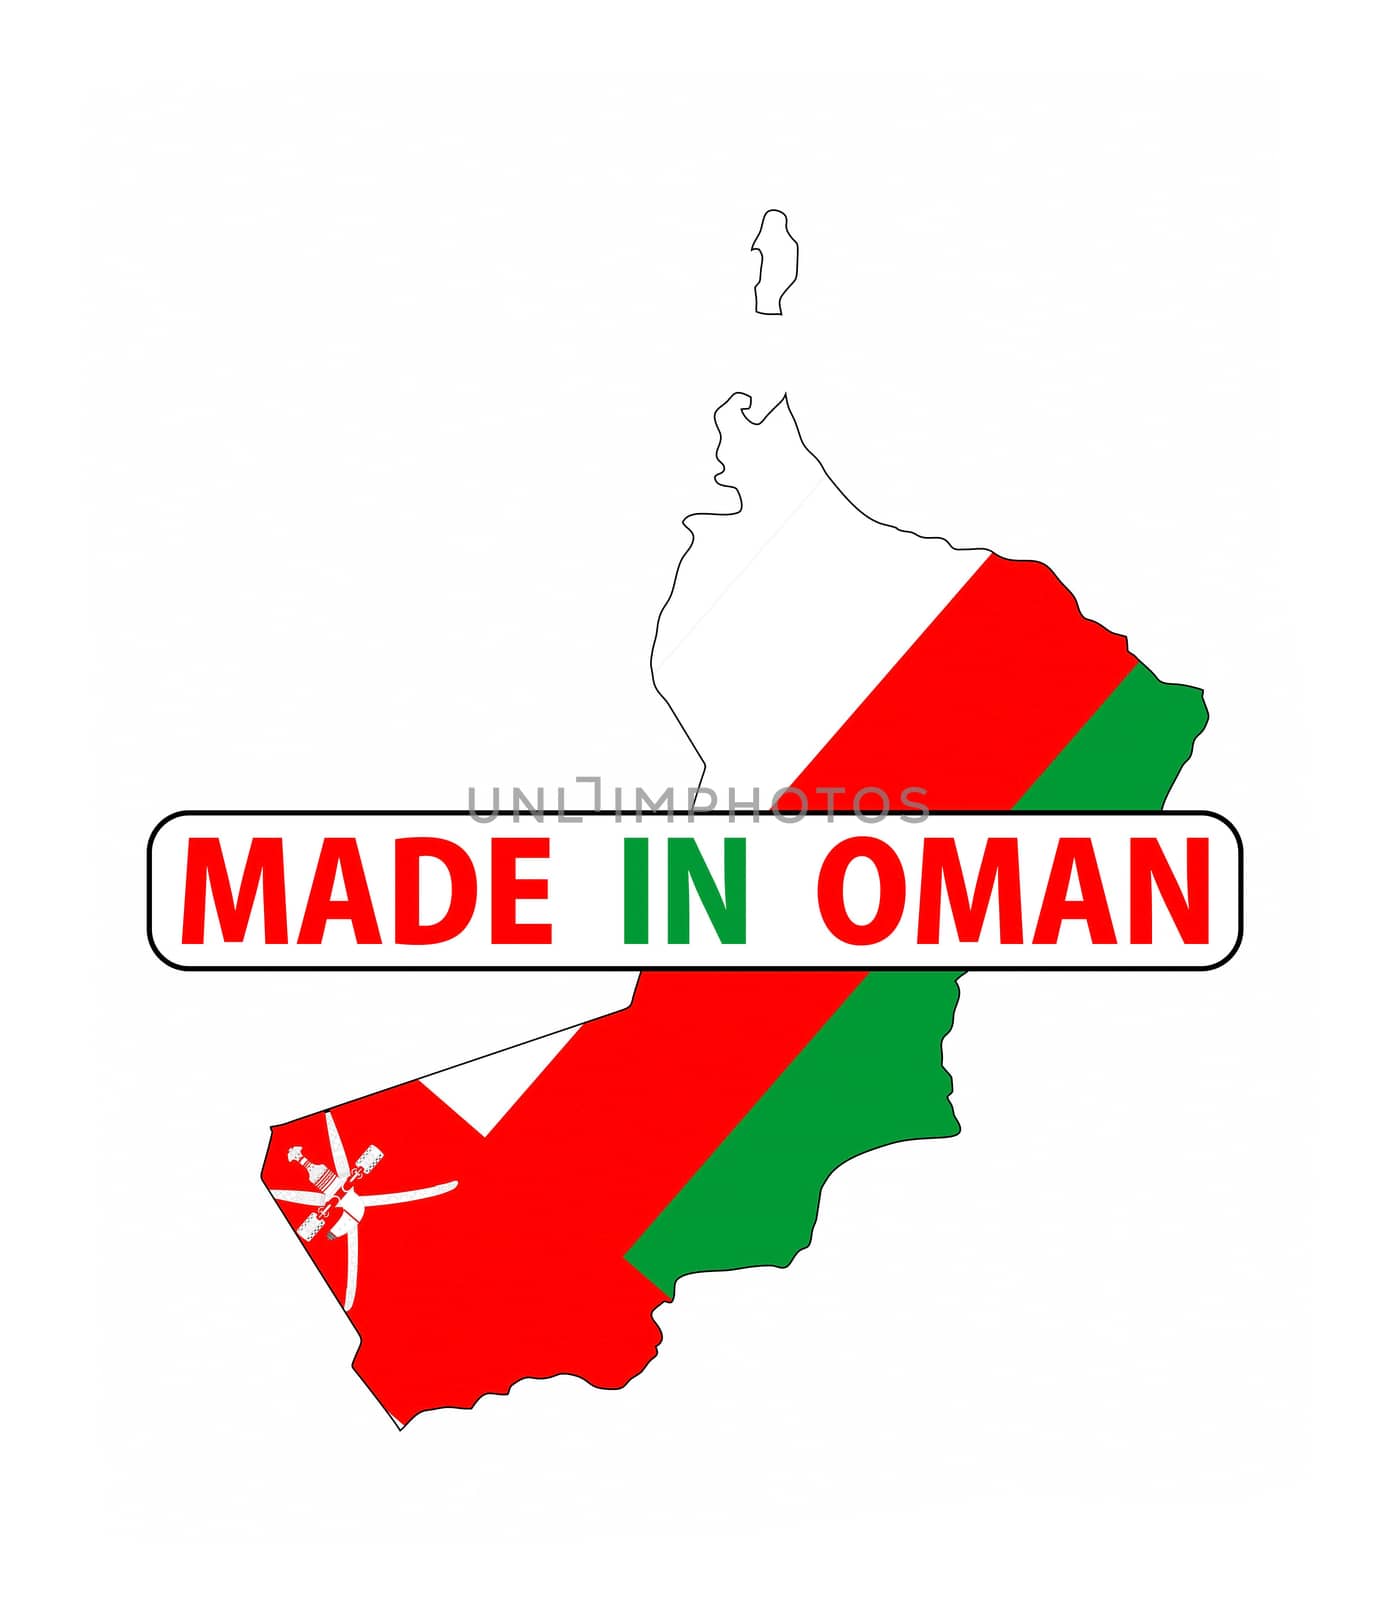 made in oman country national flag map shape with text